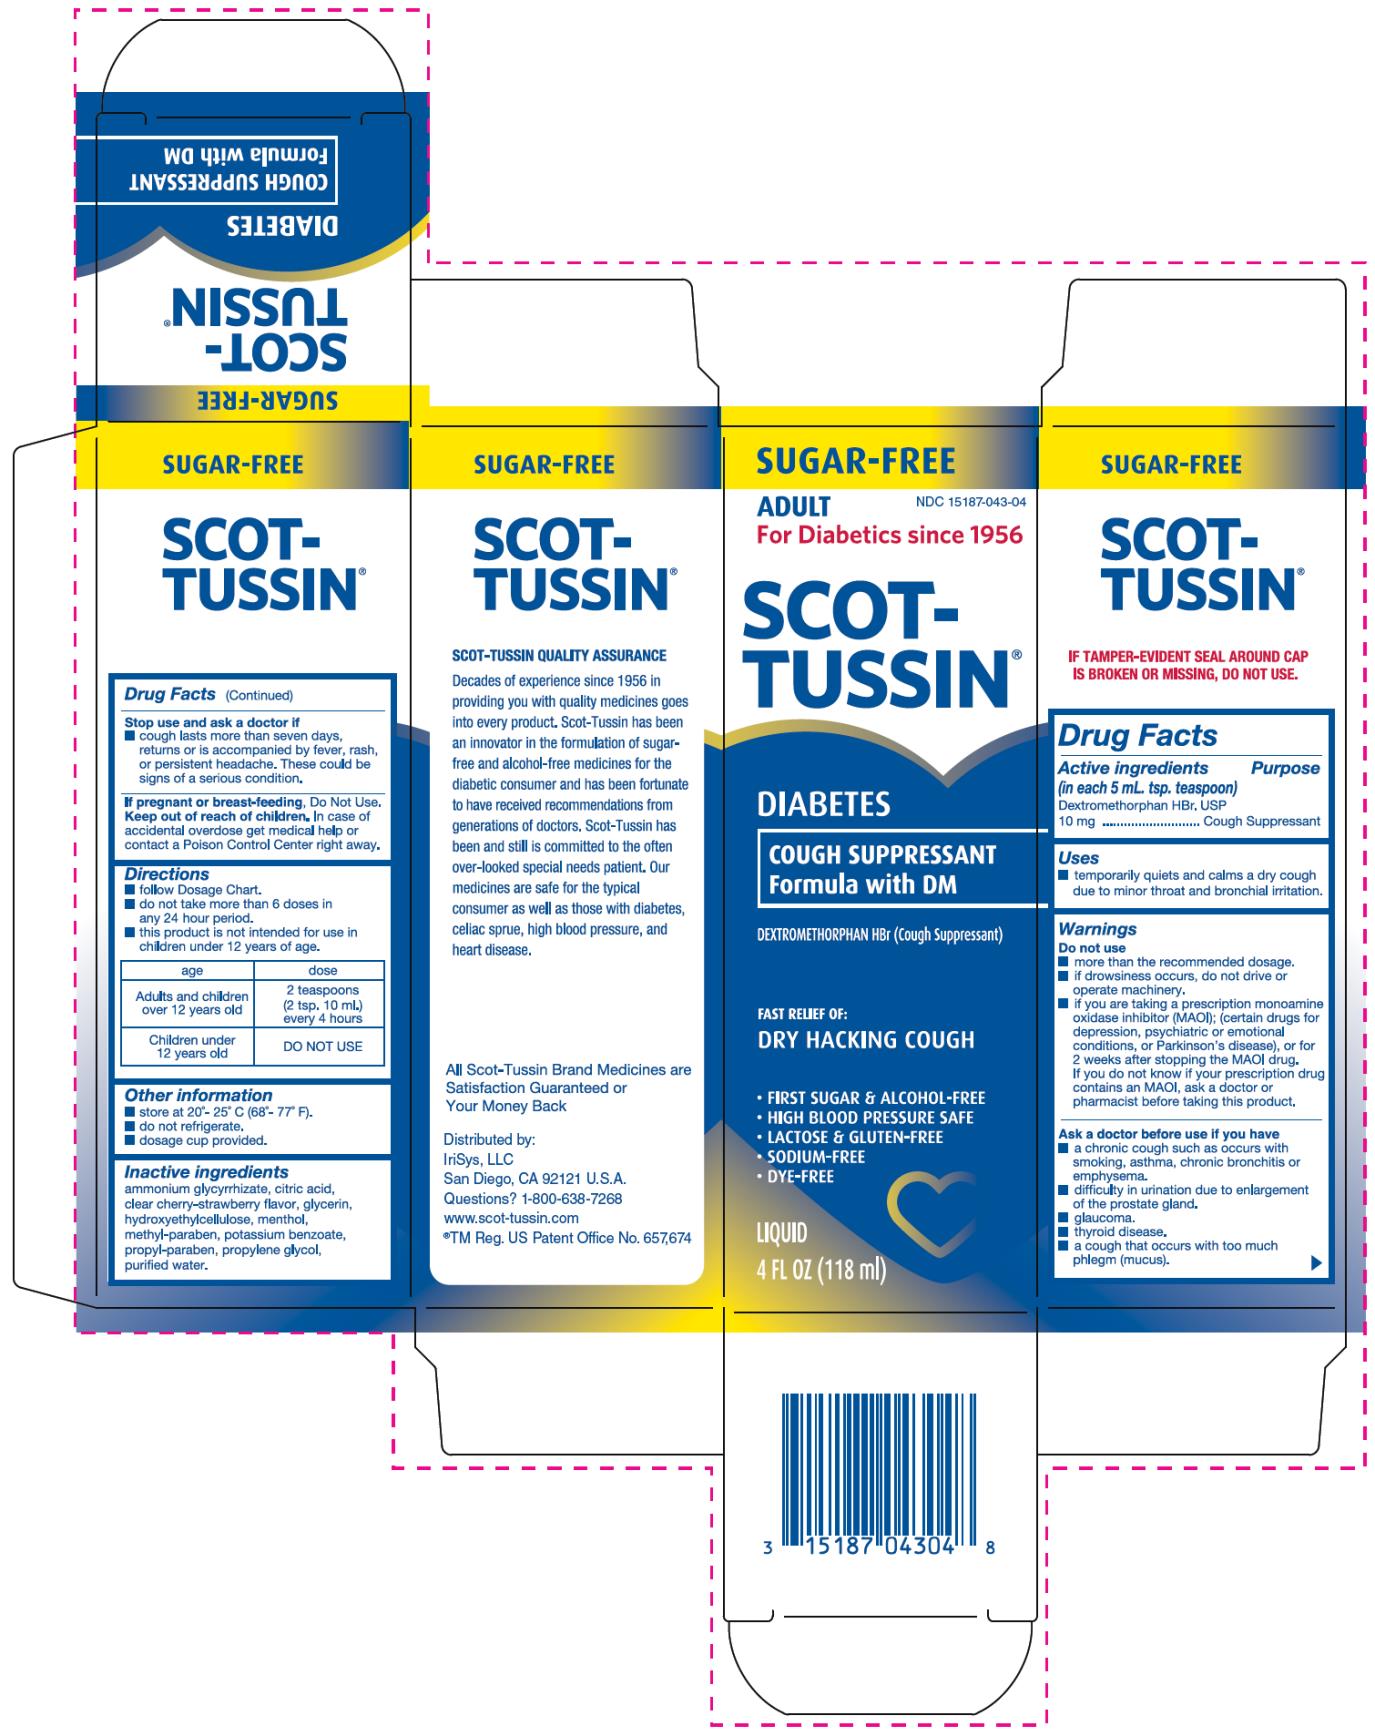 PRINCIPAL DISPLAY PANEL 
SUGAR-FREE
ADULT
NDC: <a href=/NDC/15187-043-04>15187-043-04</a>
For Diabetics since 1956
SCOT-TUSSIN®
DIABETES
COUGH SUPPLESSANT
Formula with DM
DEXTROMETHORPHAN HBr (Cough Suppressant)
FAST RELIEF OFF
DR